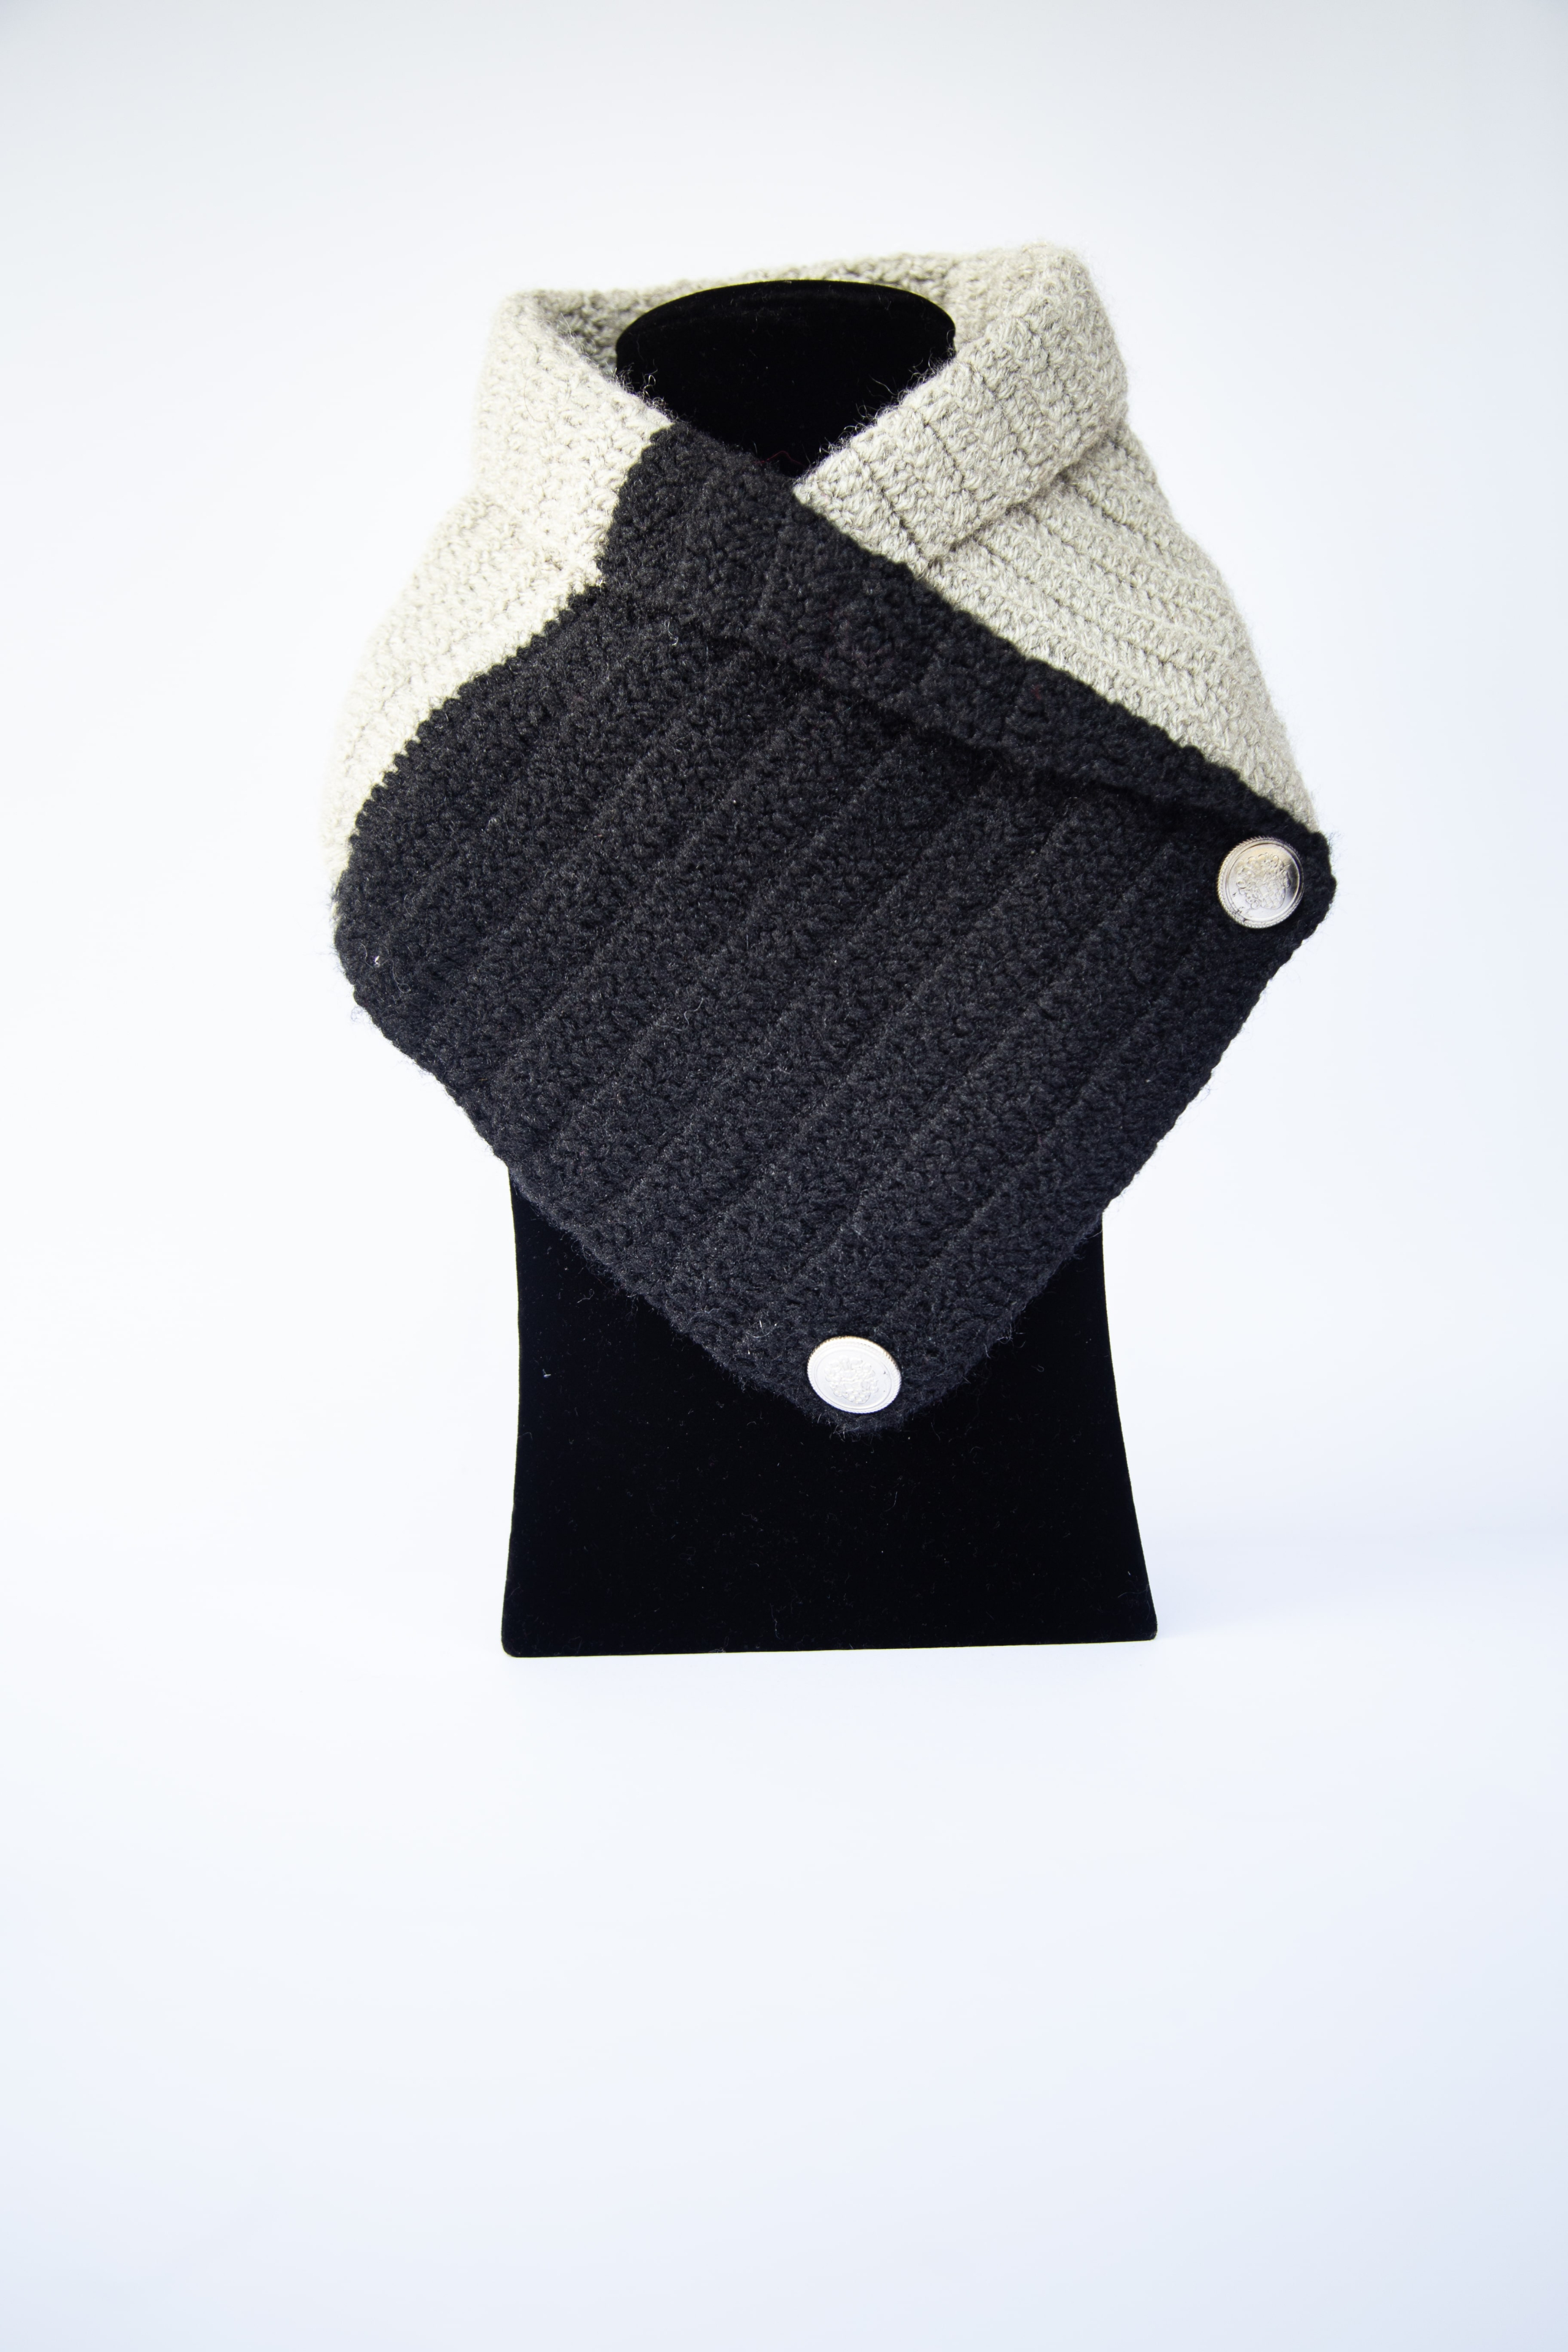 Grey-Black Neck Warmer| Woolen Winter Cowl | Scarf |Collar for Men and Women |Free Size | Ideal Gift | Handmade